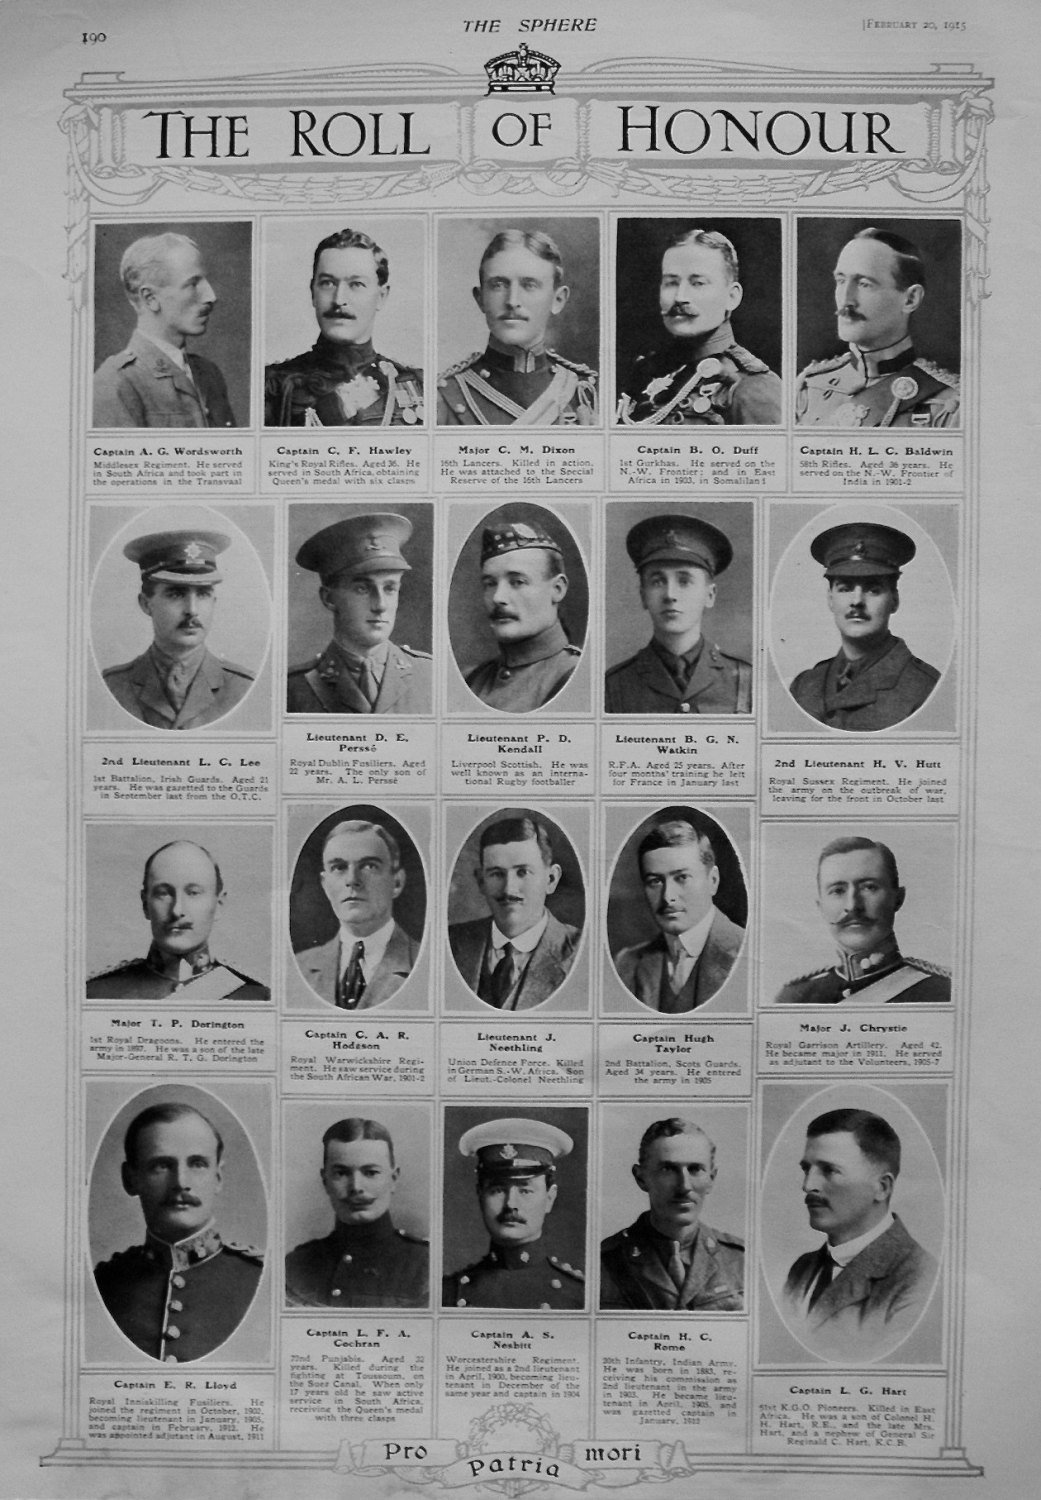 The Roll of Honour. February 20th 1915.